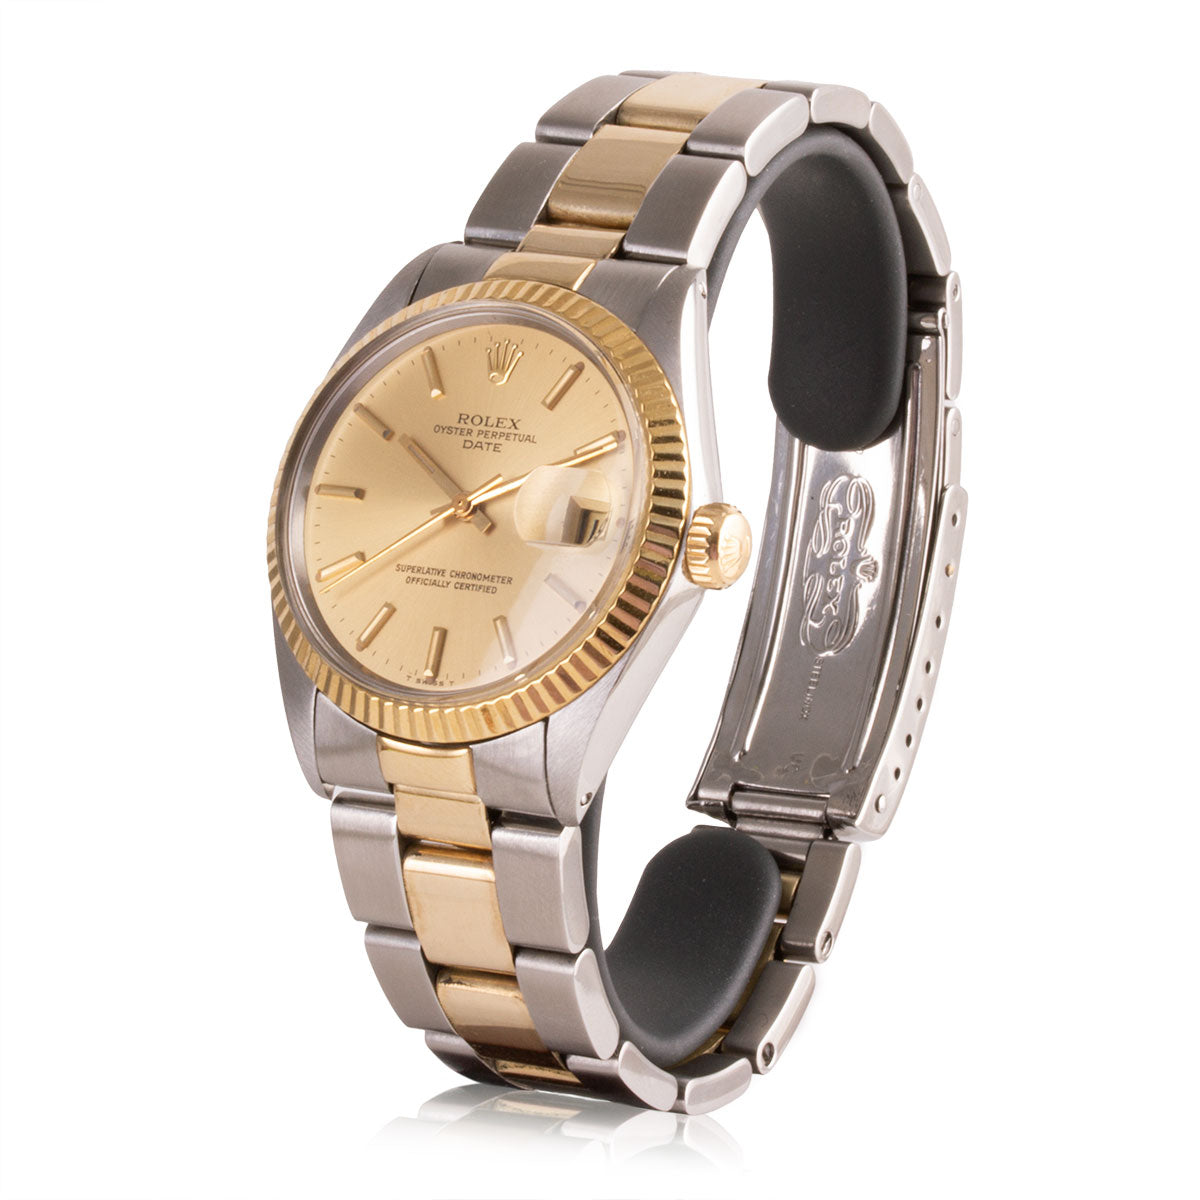 Montre d'occasion - Rolex - Oyster Perpetual - 5650€